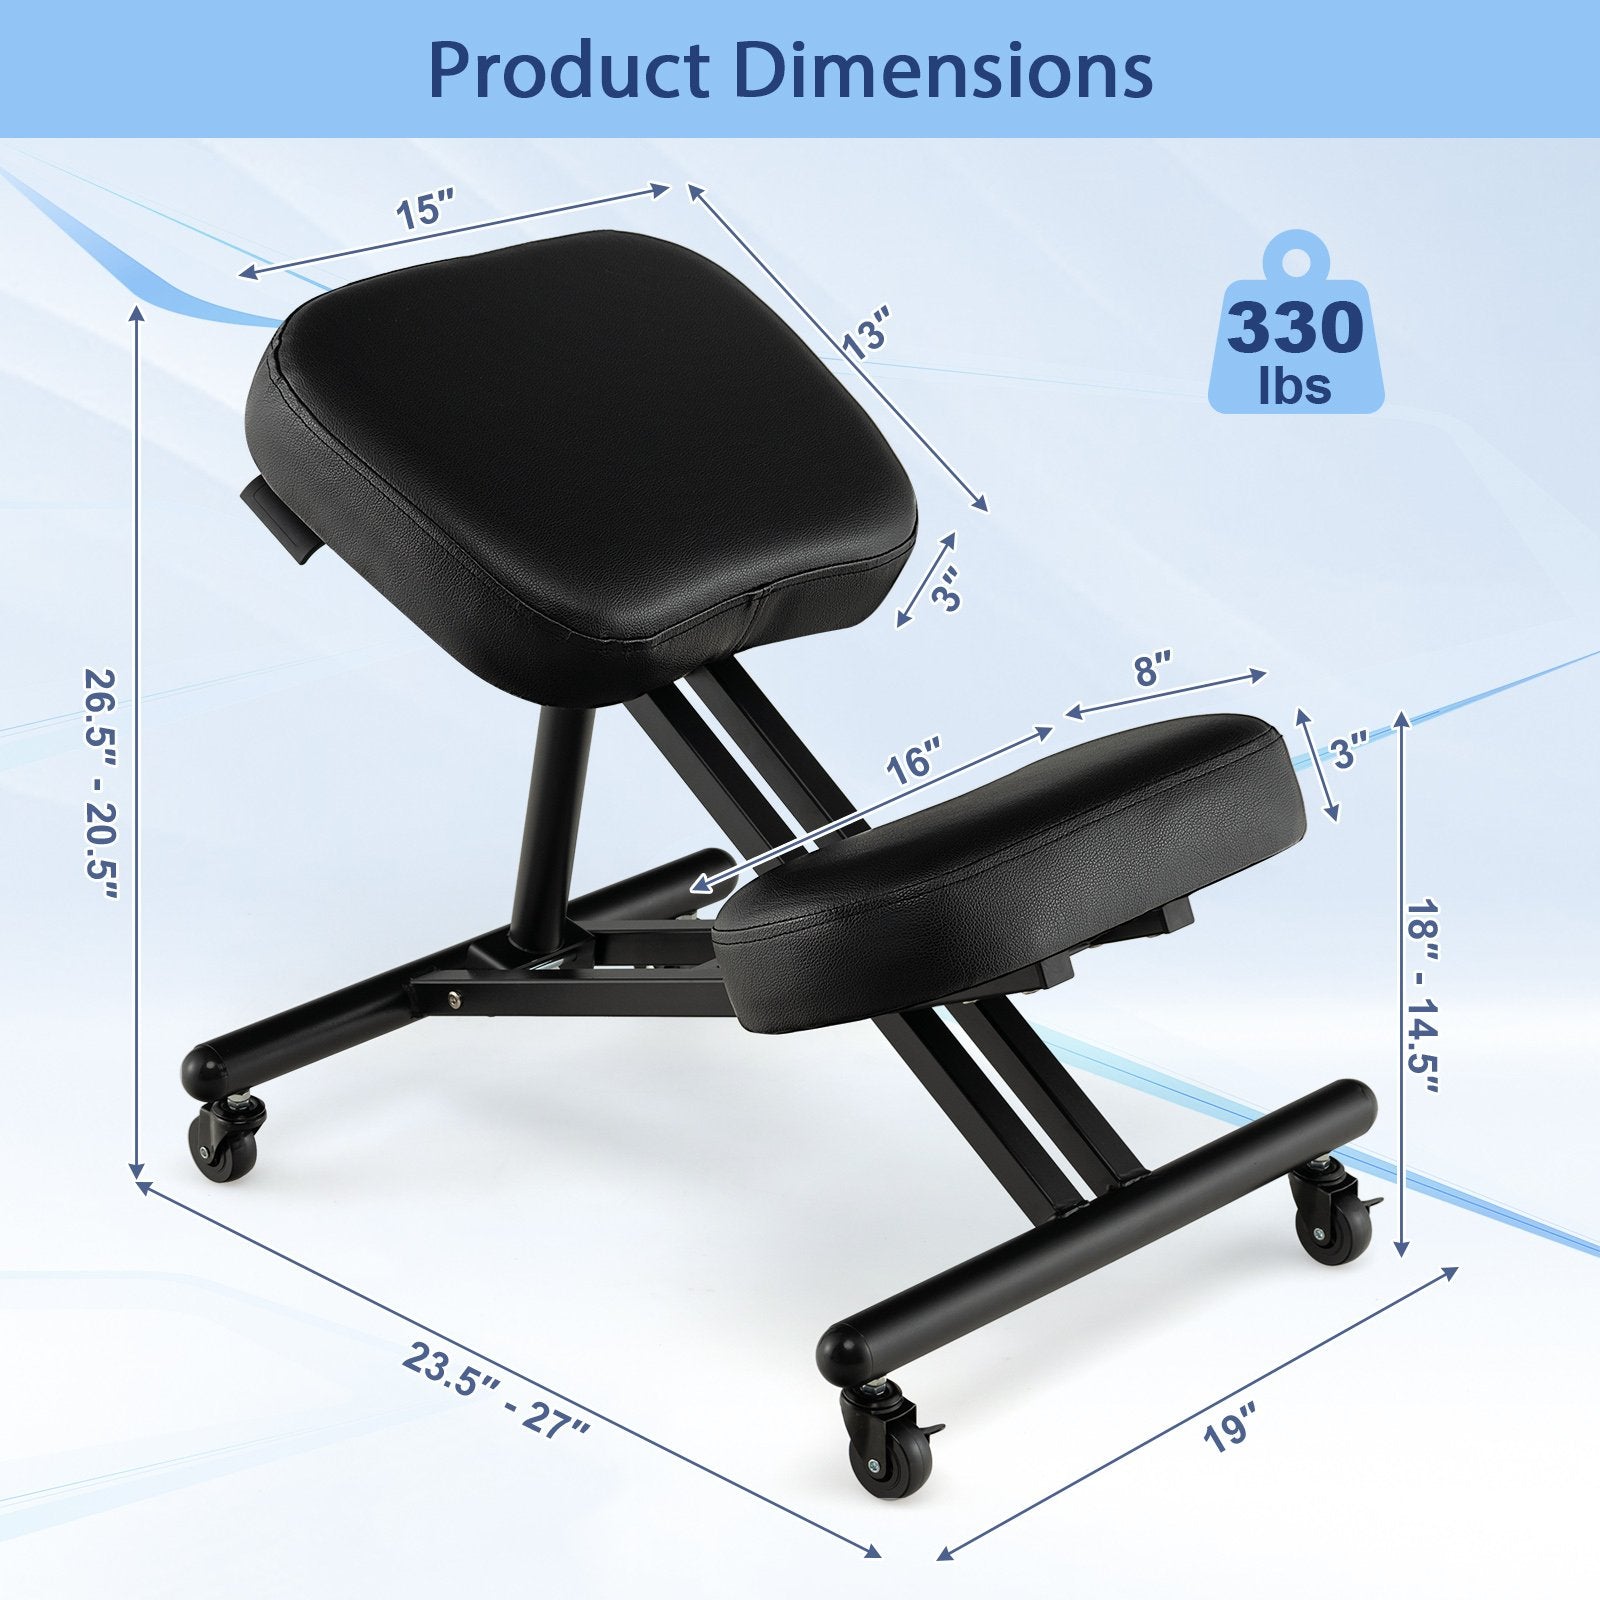 Adjustable Ergonomic Kneeling Chair with Upgraded Gas Spring Rod and Thick Foam Cushions, Black - Gallery Canada